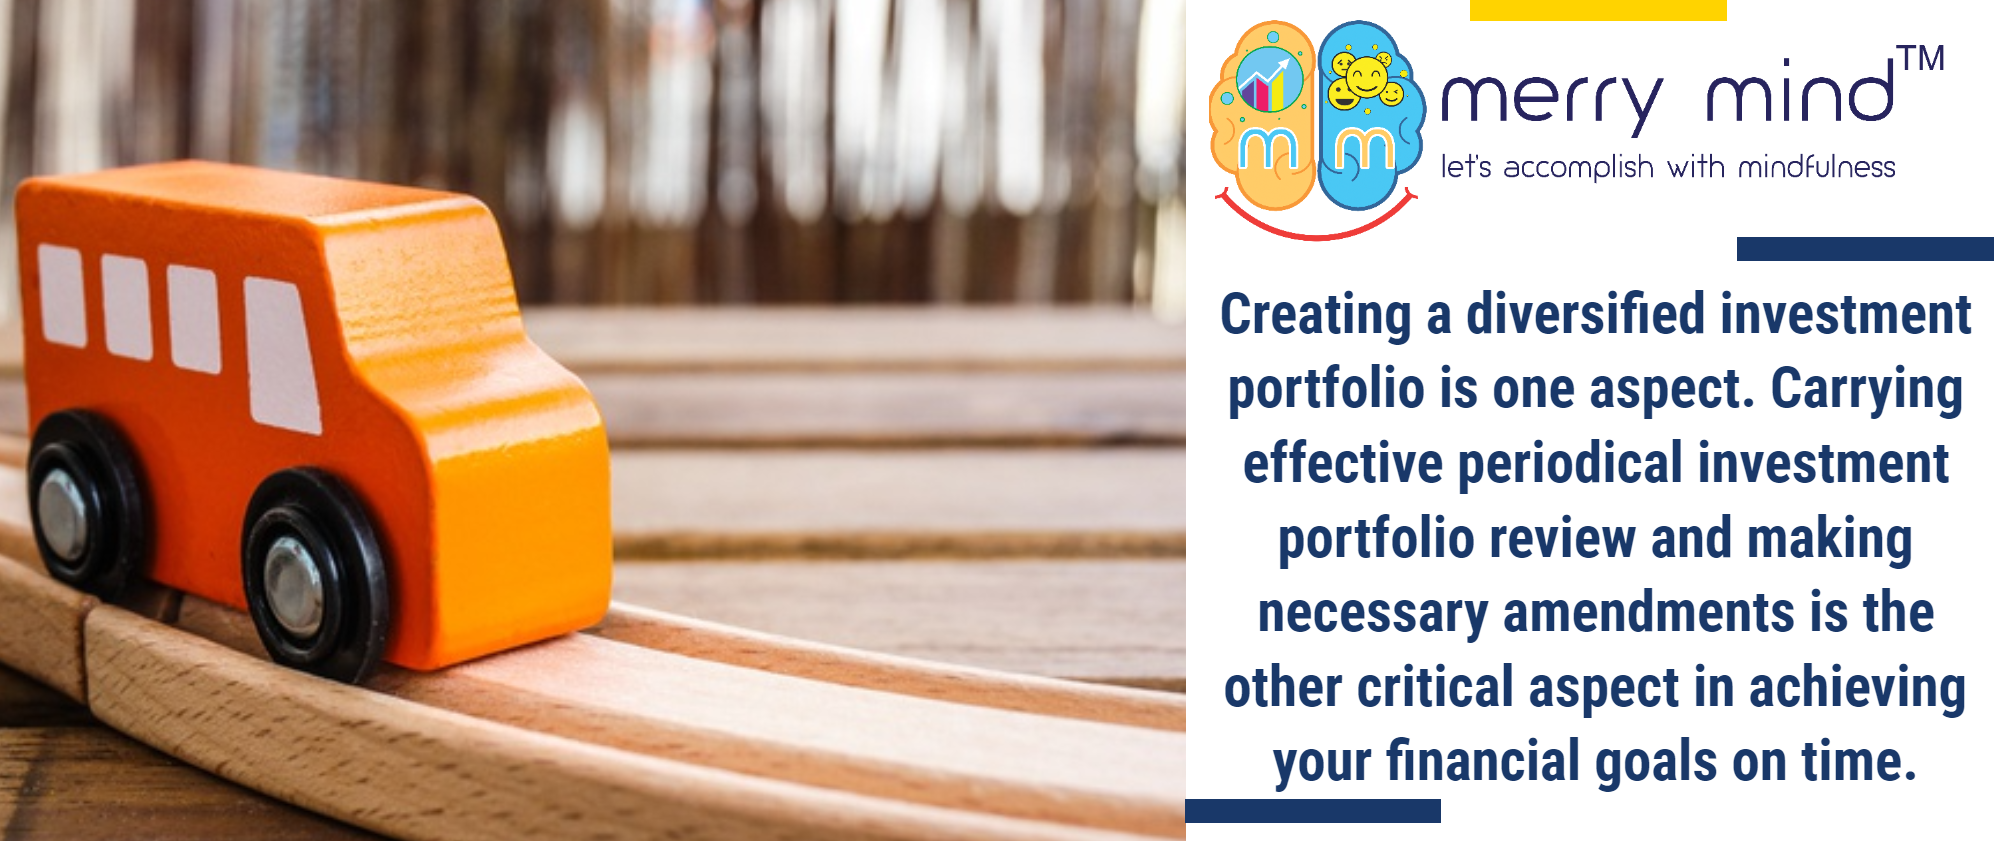 Investment portfolio review ensures that your investments are aligned to your financial goals